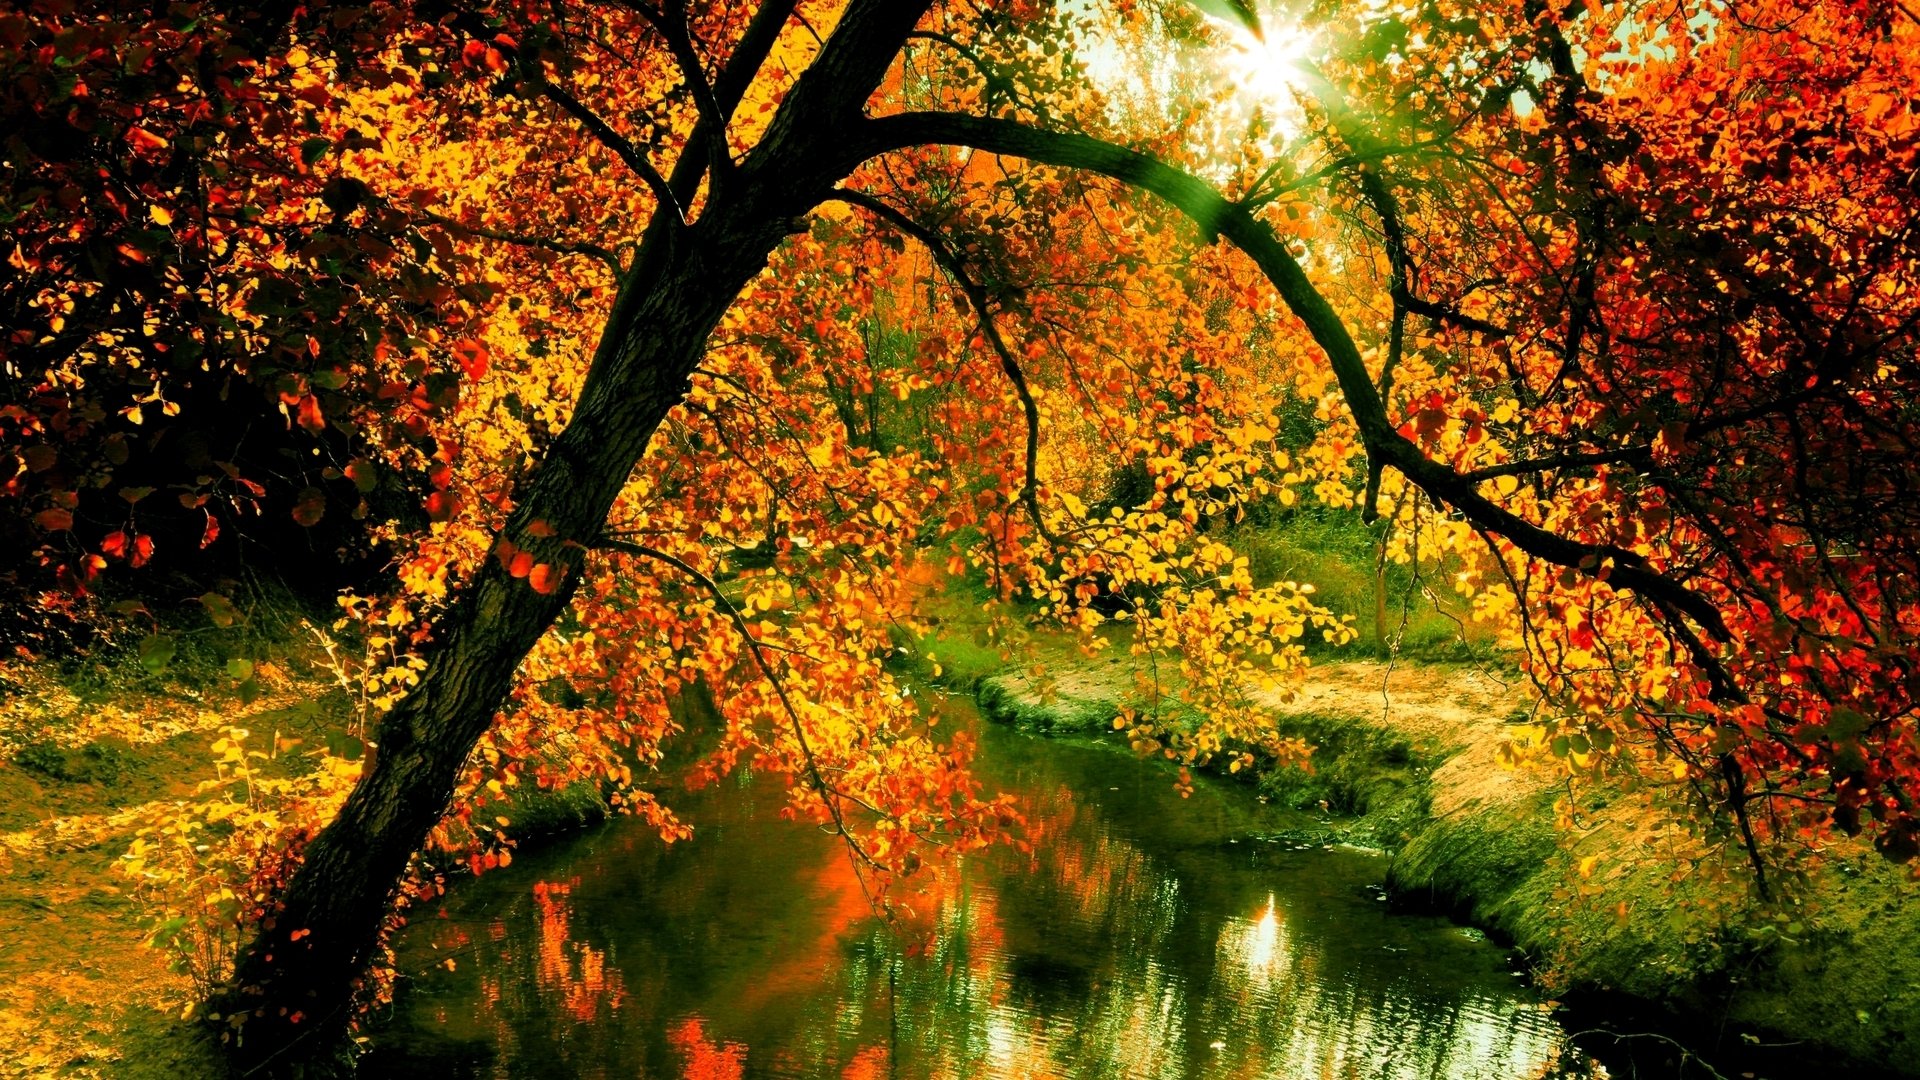 River in Autumn Forest